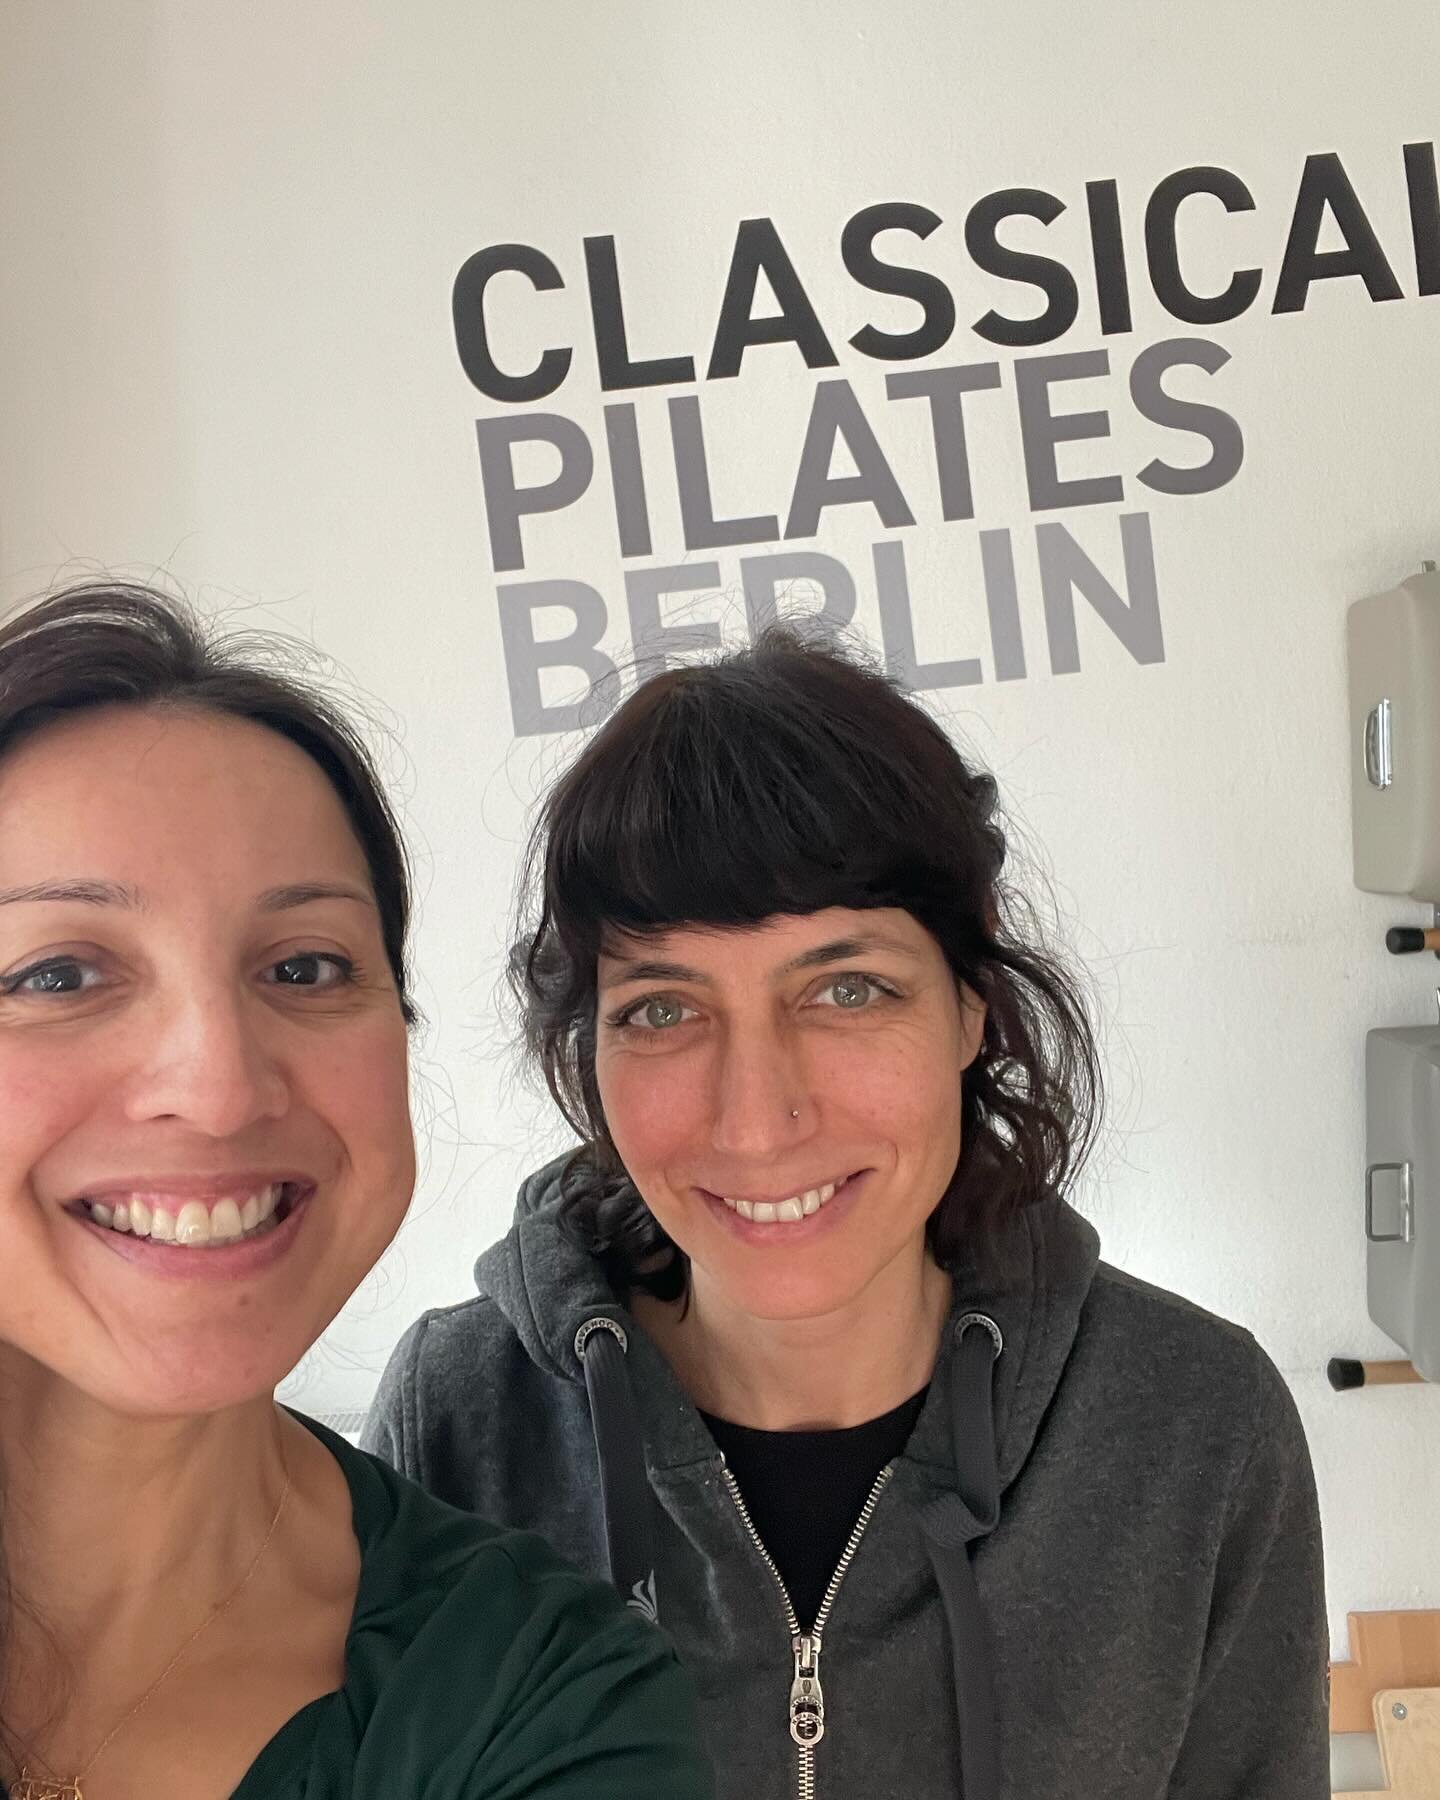 I&rsquo;ve spent a lot of time in this beautiful space @classicalpilatesberlin 💜

Ute, @tobias_derbach and Sachiko have been incredible teachers here. I&rsquo;m grateful for their classical Pilates instruction. Literally keeping me on my toes. 

Aft